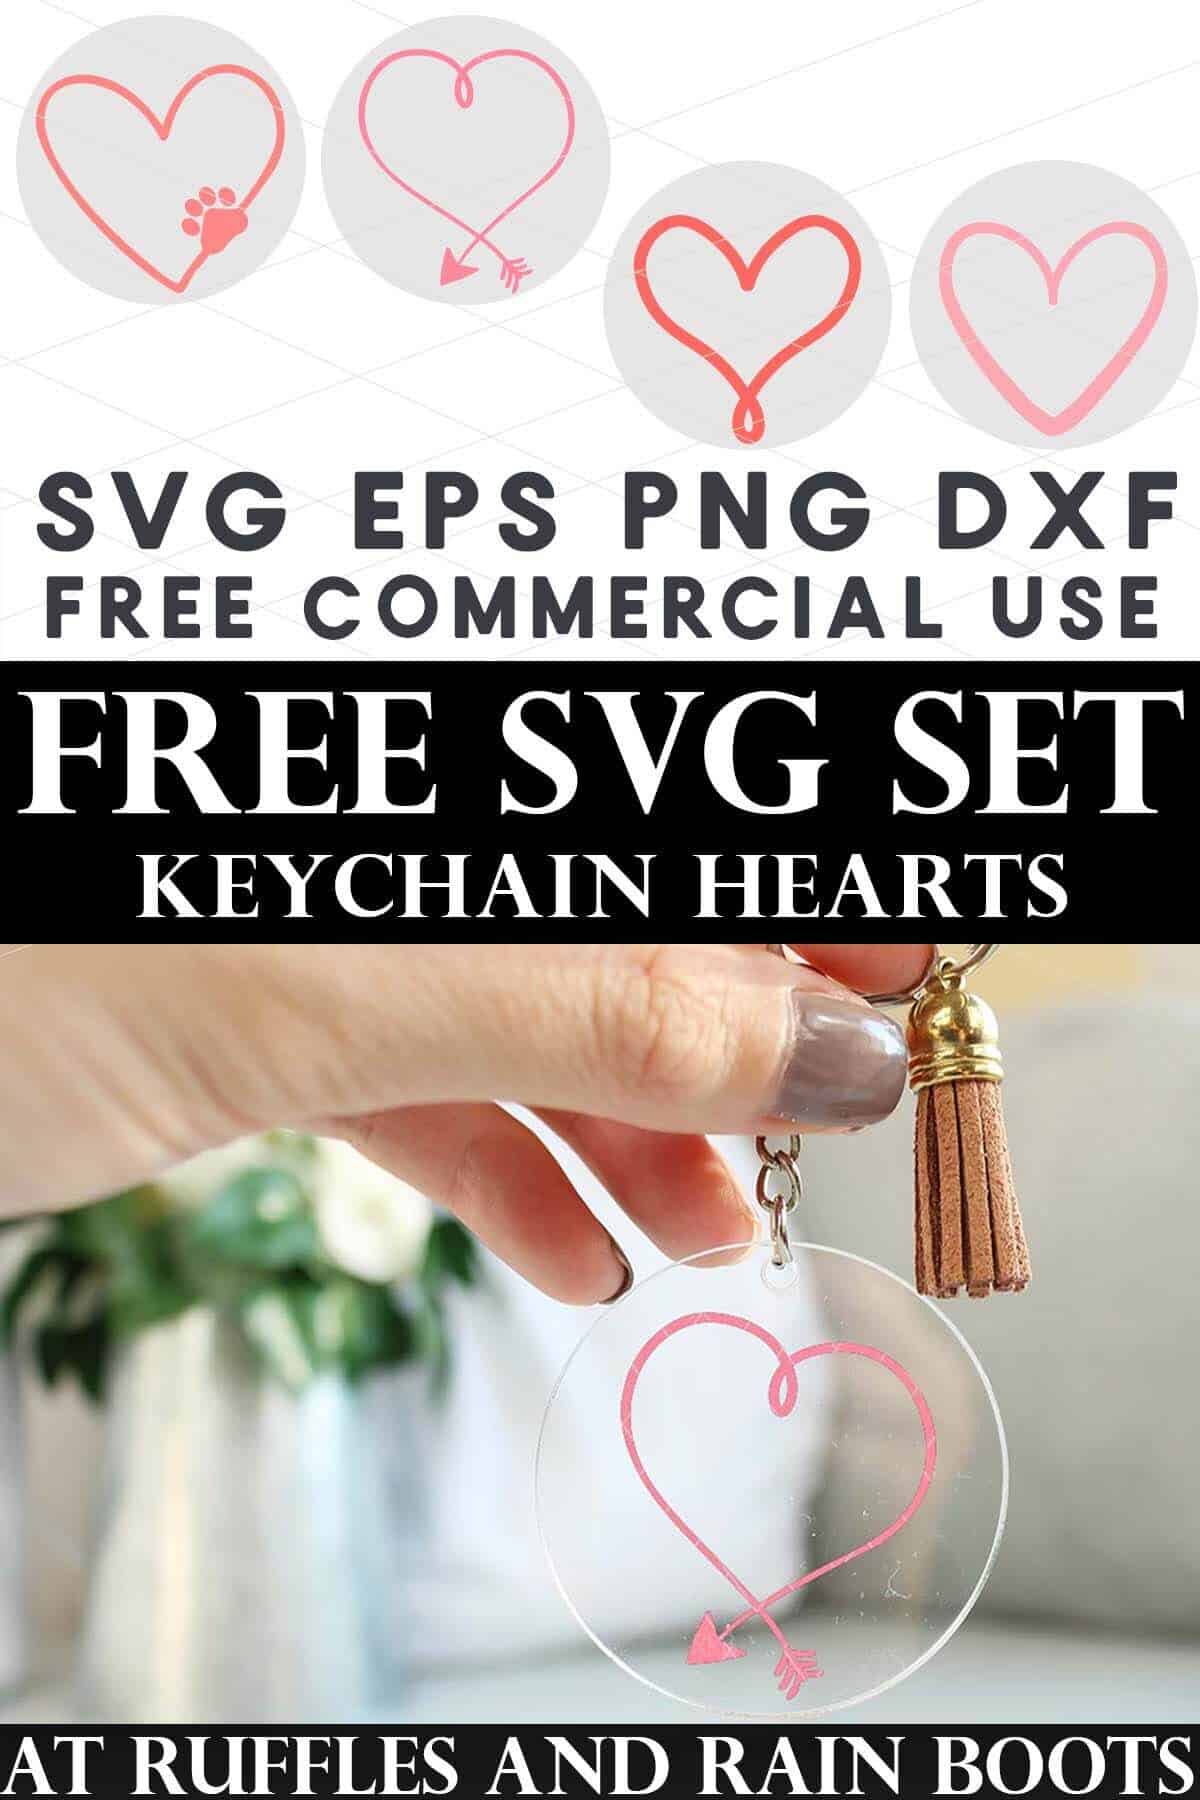 Vertical split image of four free heart keychain SVG designs and woman holding clear keychain.